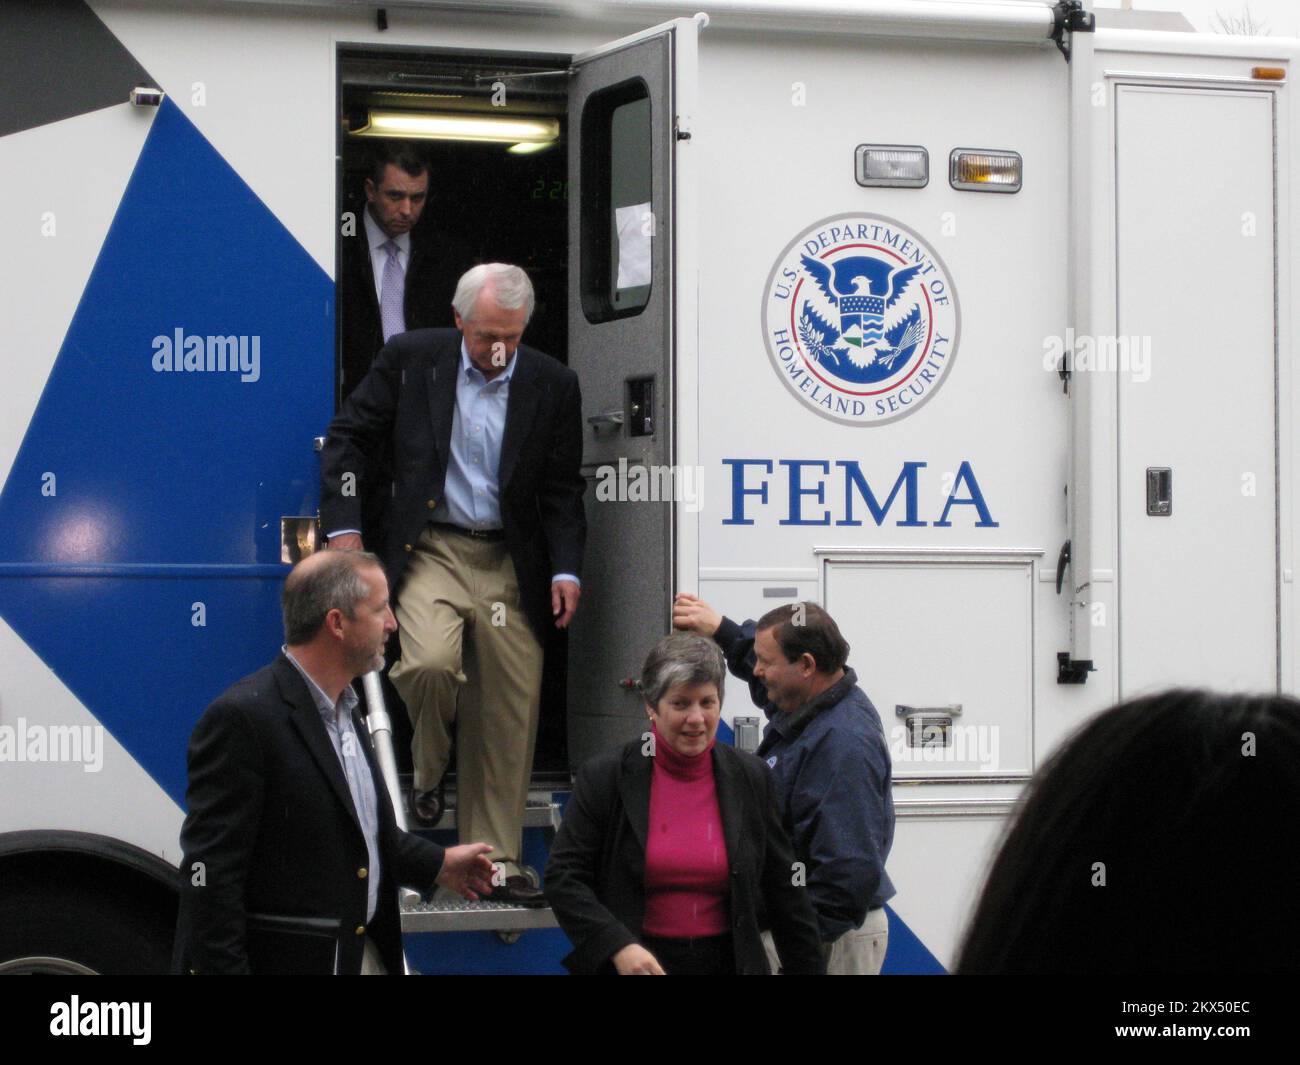 Winter Storm - West Paducah, Ky. , February 10, 2009   DHS Secretary Janet Napolitano and Kentucky Governor Steve Beshear tour a FEMA MERS unit. The Mobile Emergency Response Support vehicle provided communications and generator support for local emergency officials during the recent ice storm. Kentucky Severe Winter Storm and Flooding. Photographs Relating to Disasters and Emergency Management Programs, Activities, and Officials Stock Photo